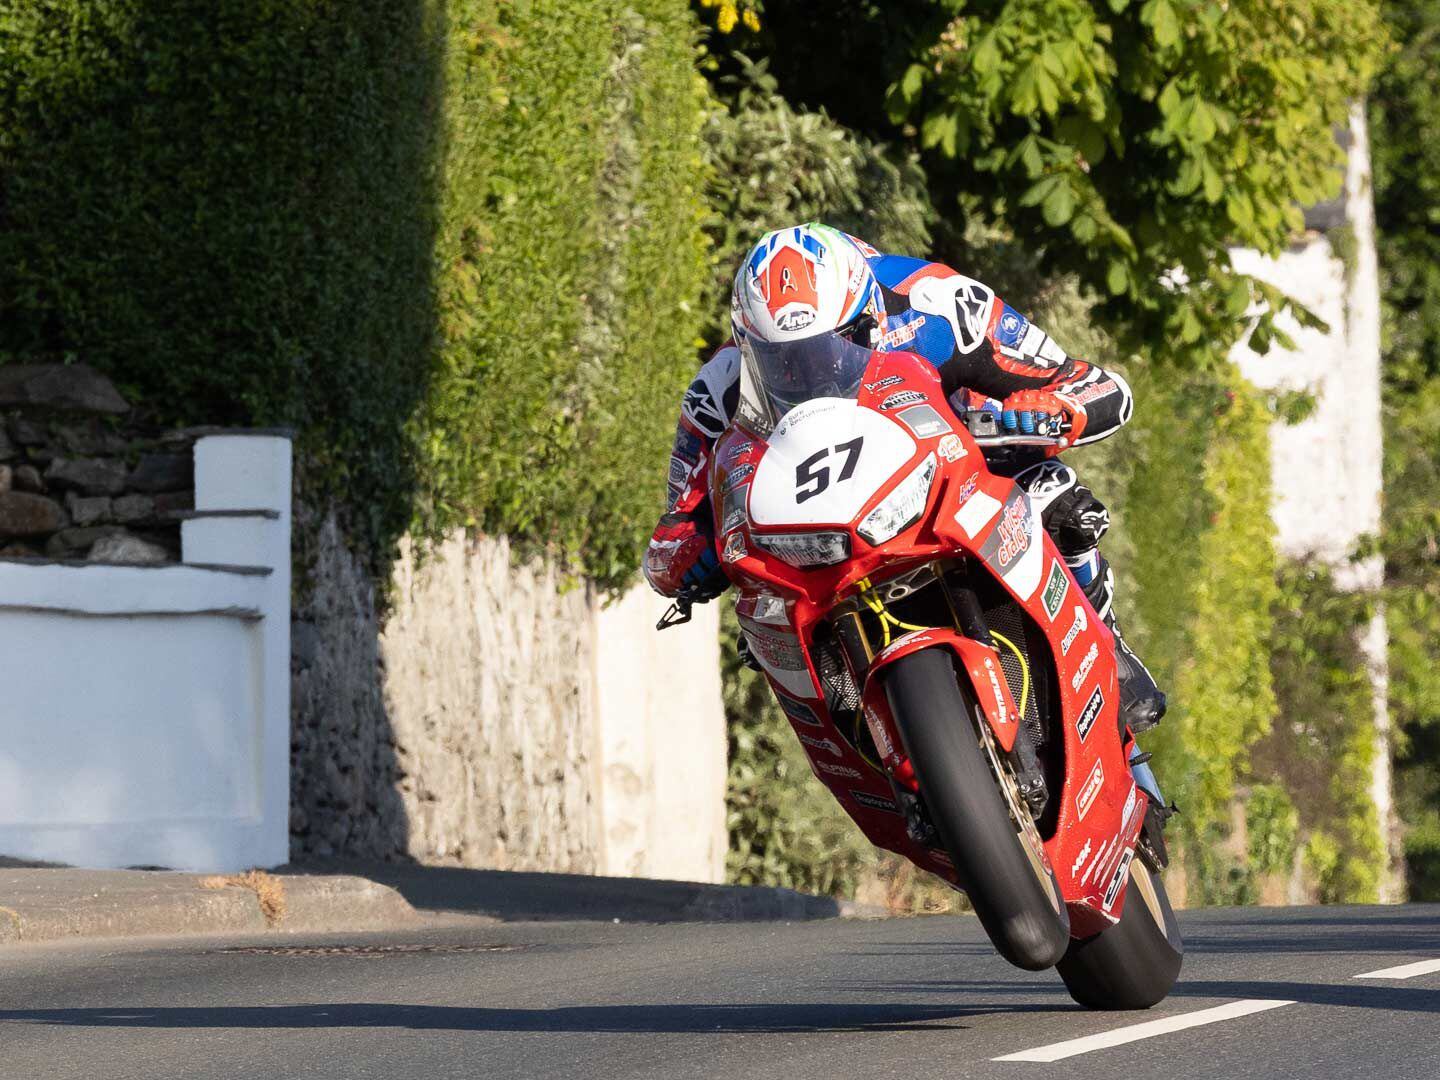 Aussie and <i>Cycle News</i> staffer Rennie Scaysbrook launches his Honda CBR1000RR-R Fireblade Superbike off Ballagarey. Soon after, he switched rides and competed on a BMW.